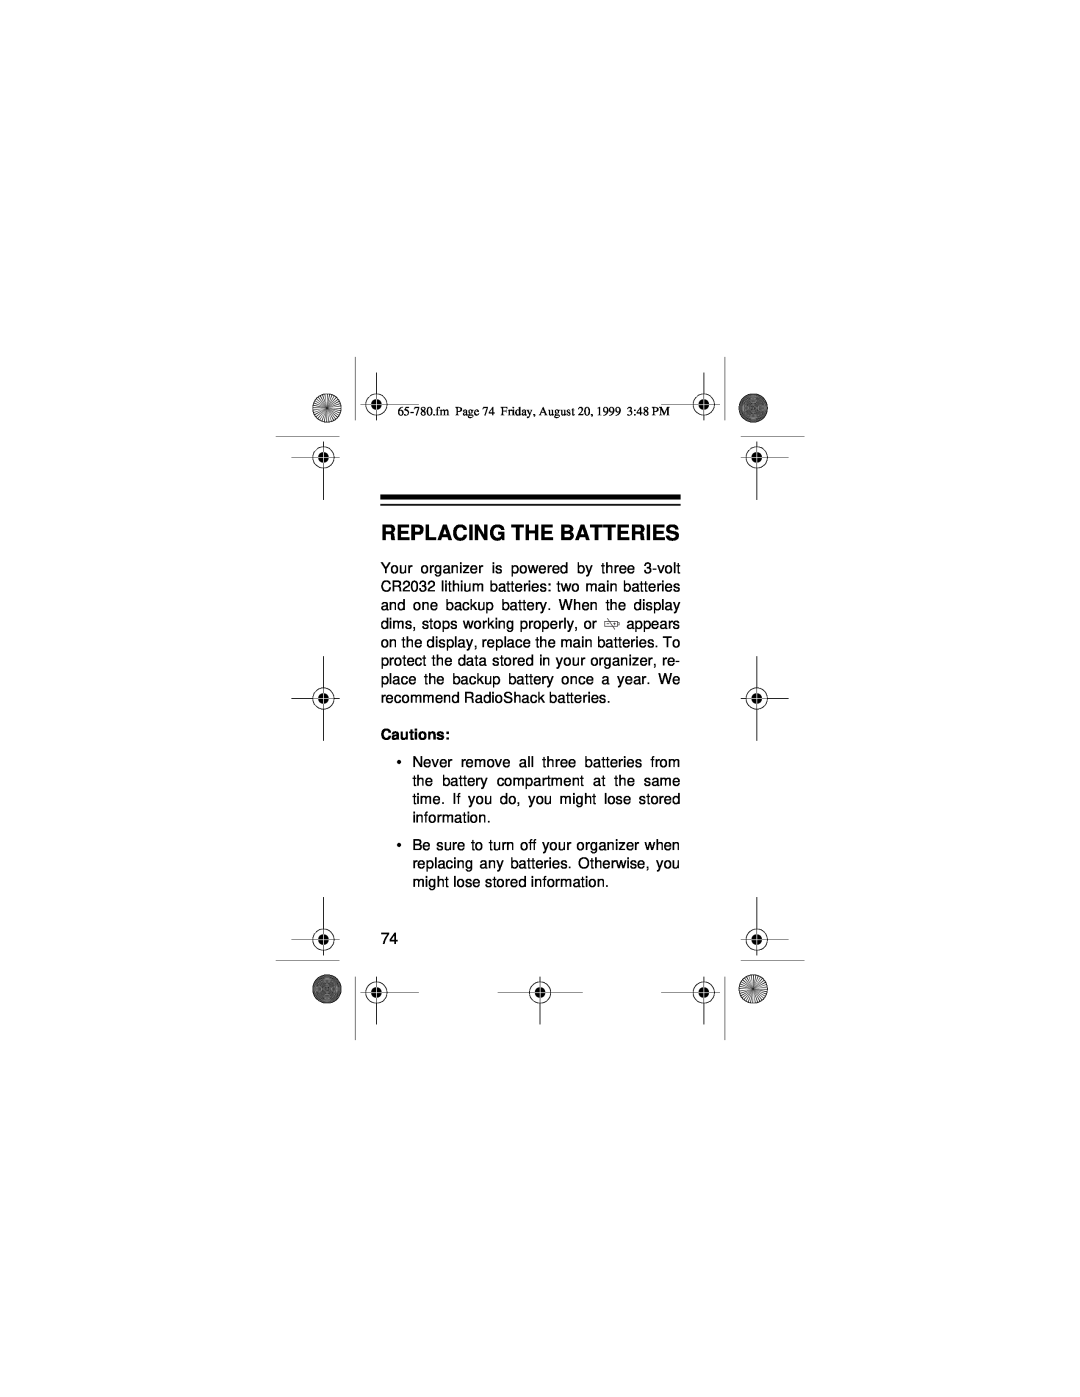 Samsung 256K owner manual Replacing The Batteries, Cautions 